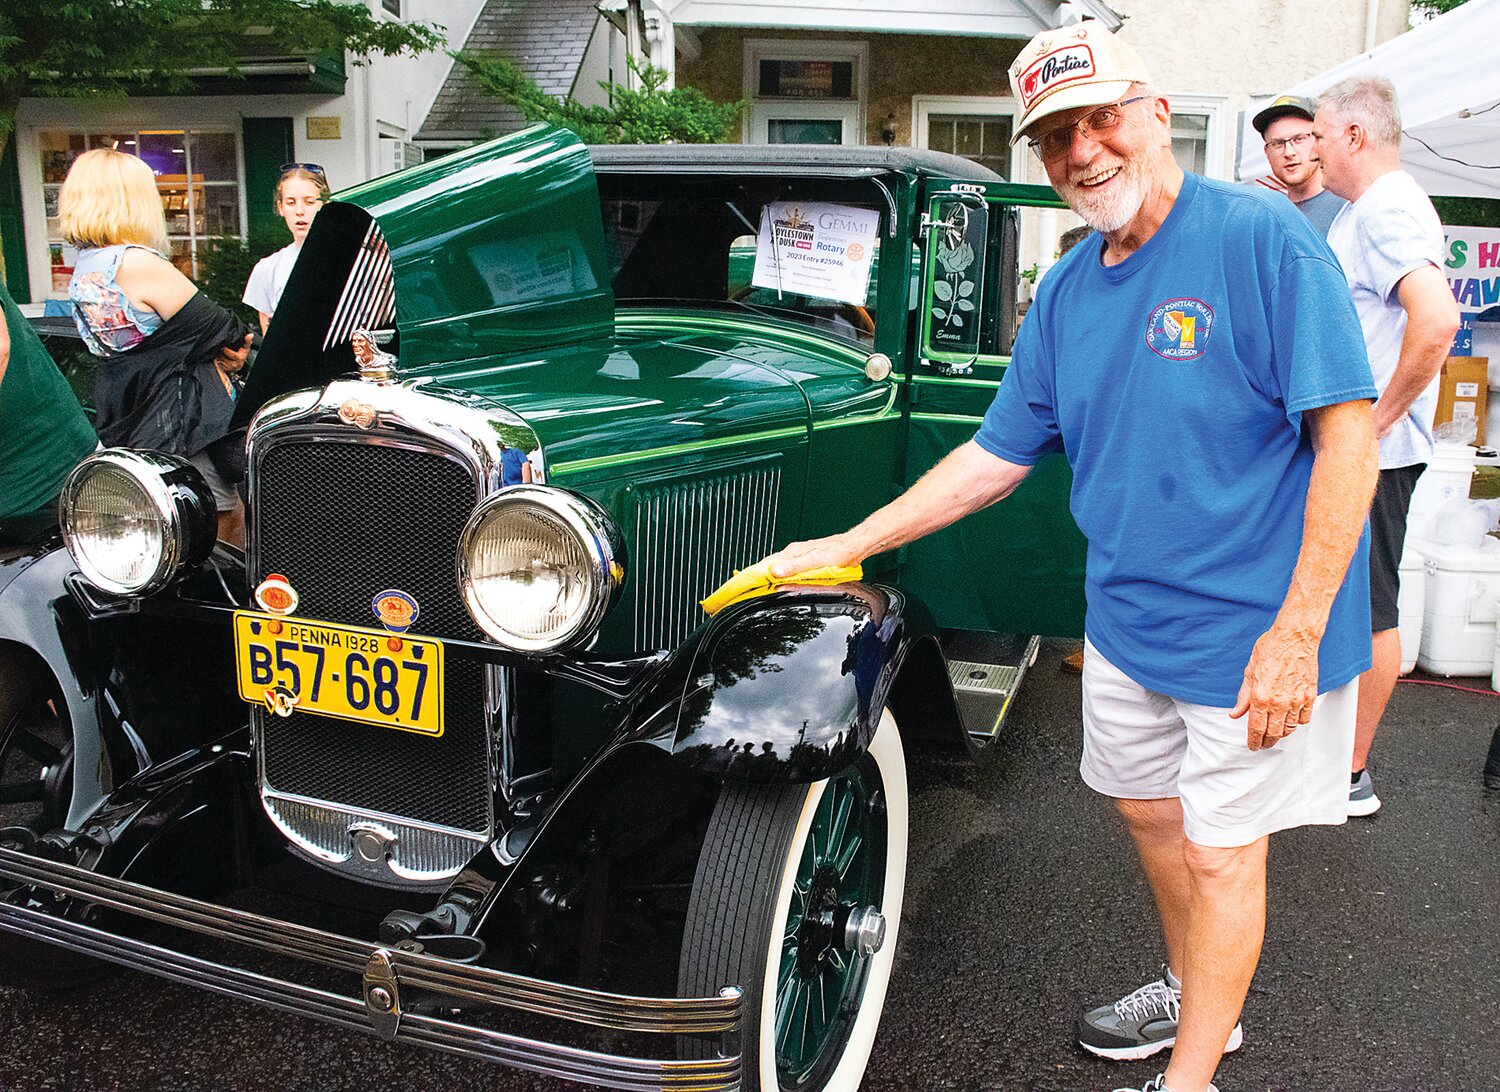 Terry Schweikert wipes his 1928 Pontiac Landau Coupe clean after the rain. The vehicle won a Top 40 Award.